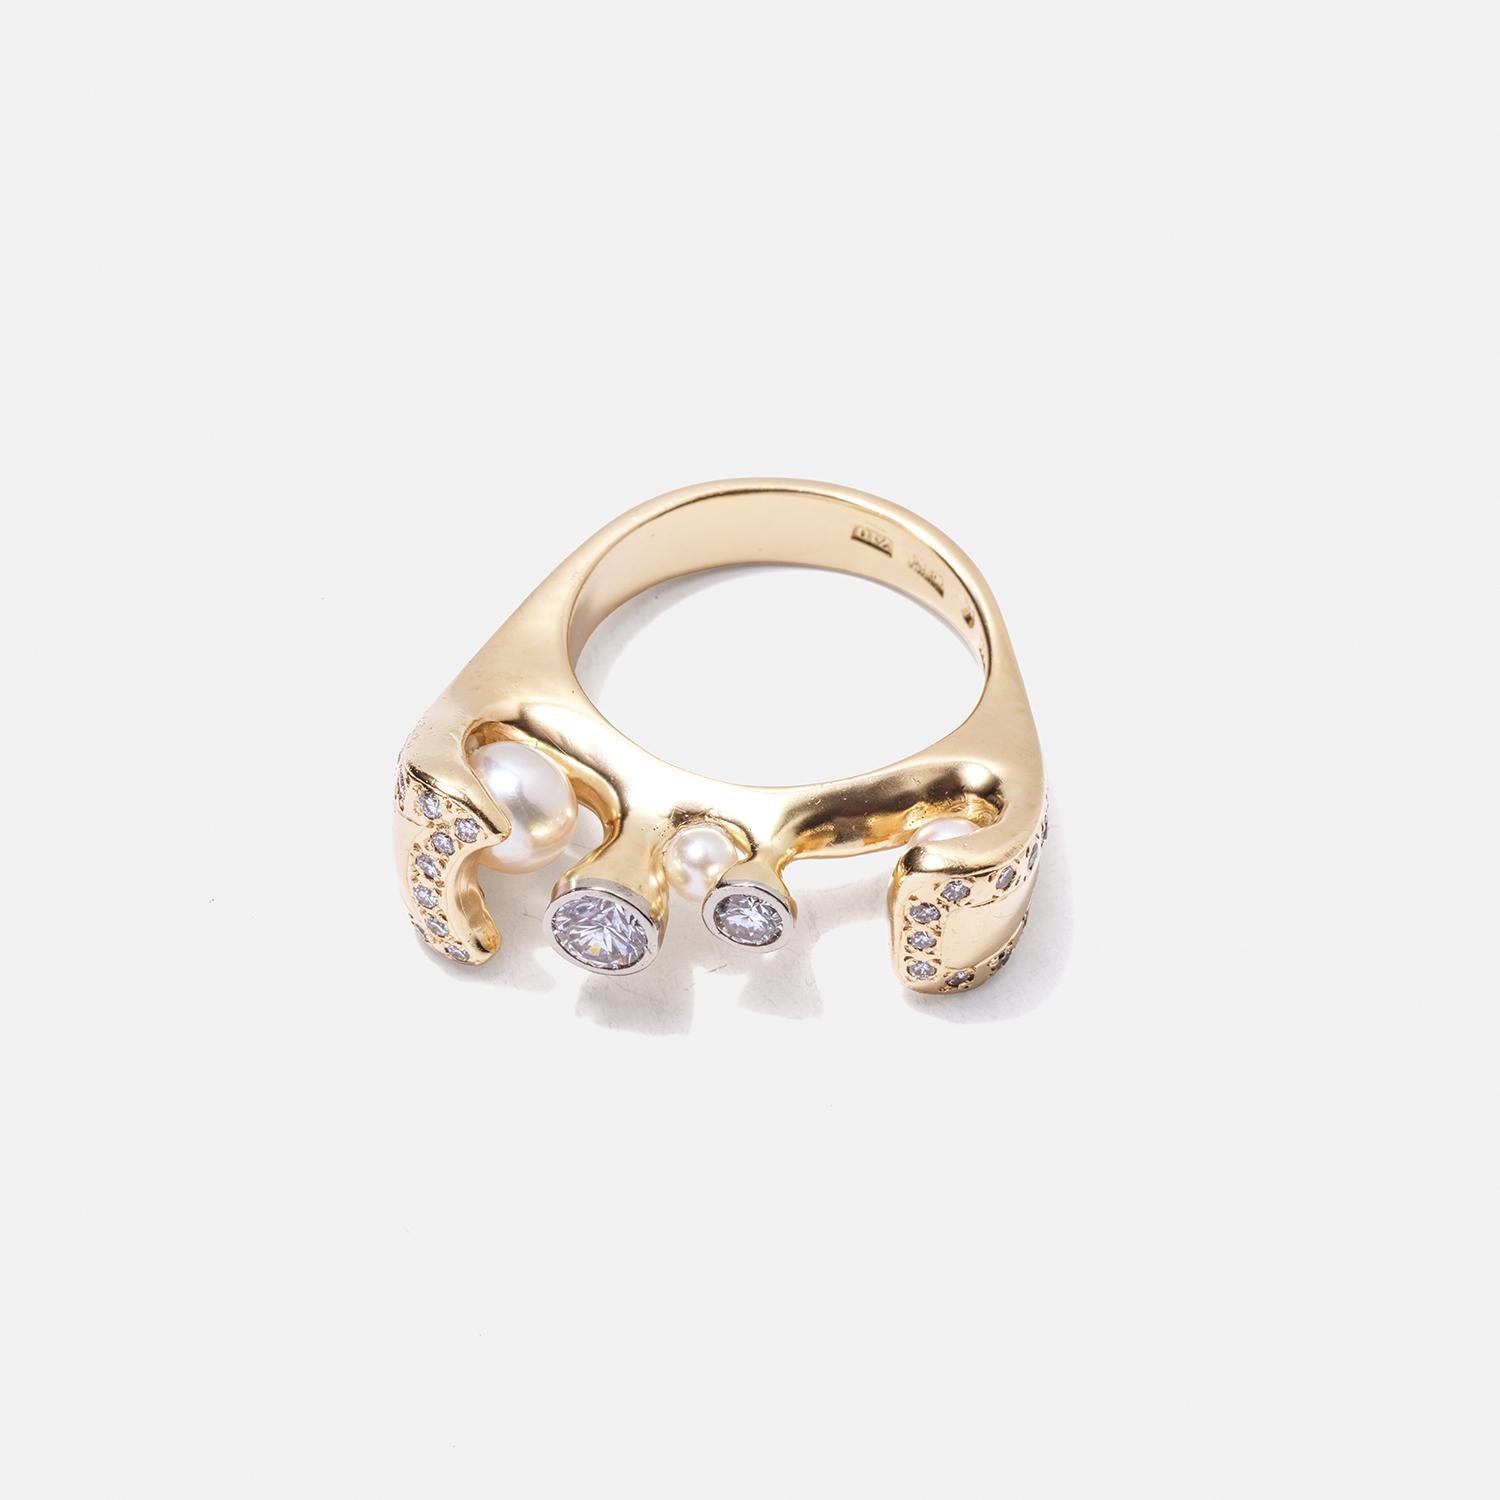 Brilliant Cut Vintage 18k Gold, Diamonds and Pearls Ring by Swedish Master Johan Jobring, 1998 For Sale